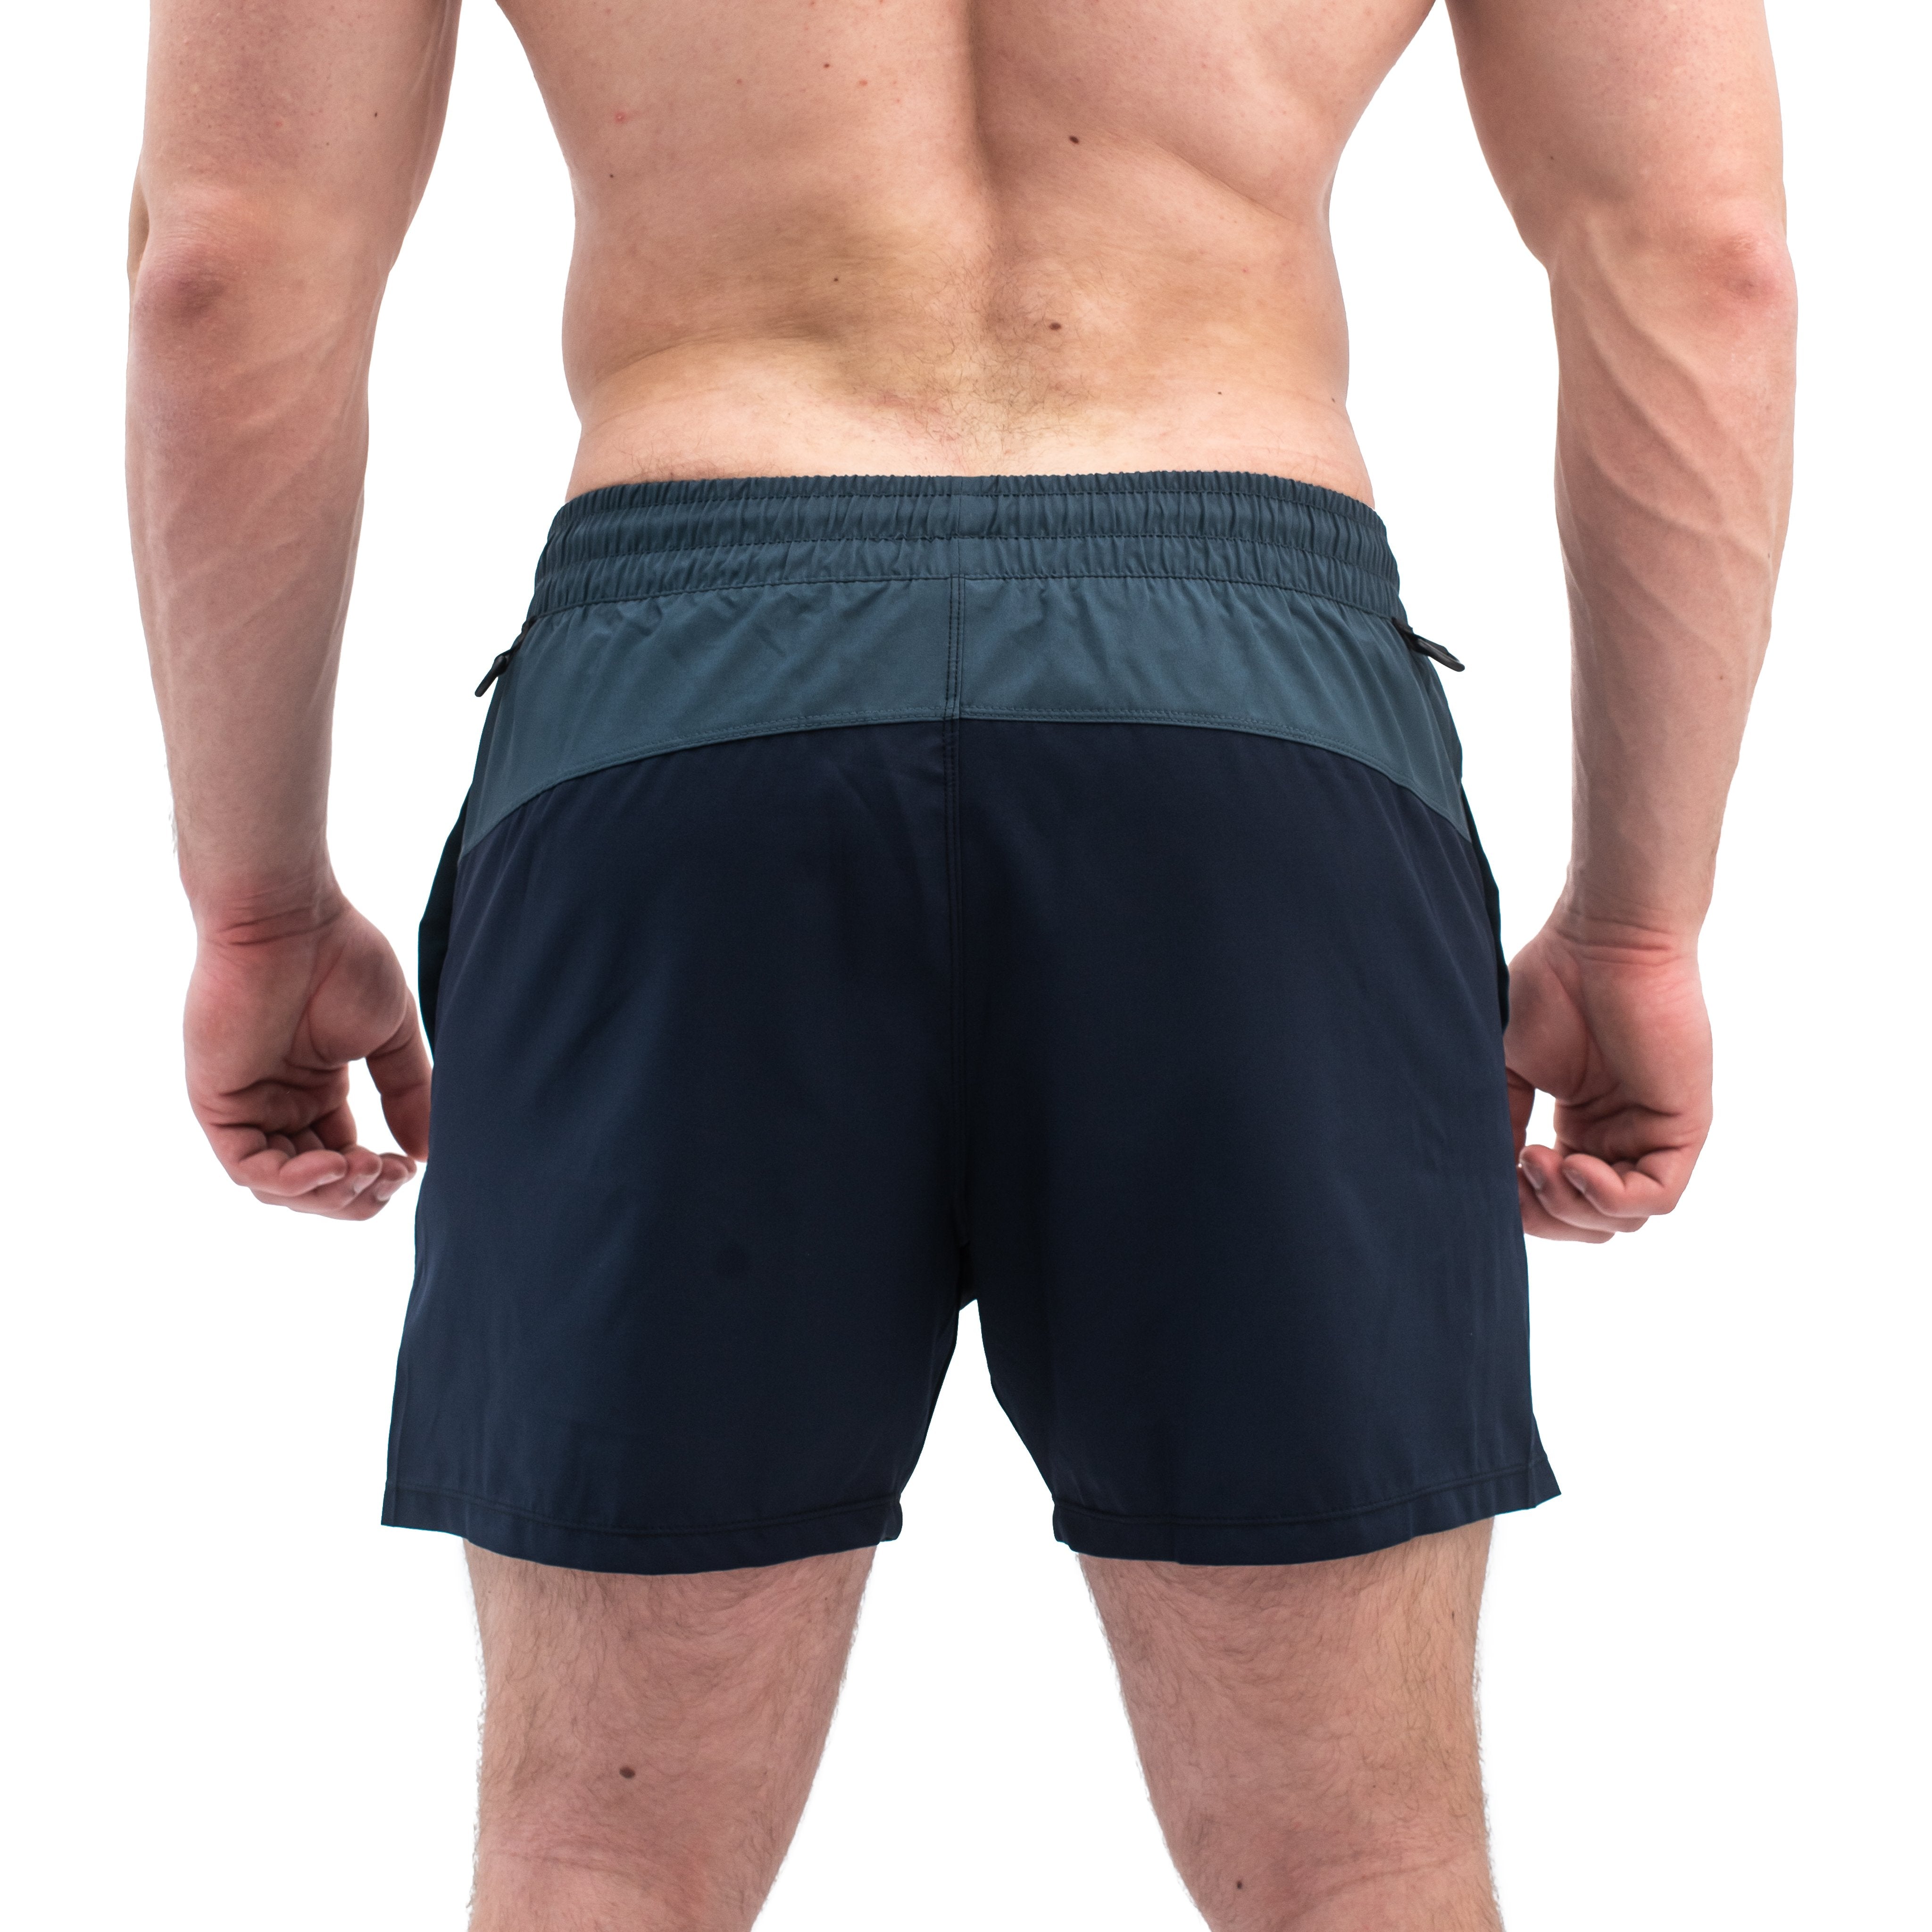 A dual colour-way inspired by the natural discolouration of iron when is formed. Named after our love for the iron and themed on the dark colours that set the mood for maintaining the focus to achieve your goals. It's all about avoiding distractions and with our Centre stretch of these shorts you can maintain the fit you want with the added comfort of a little extra stretch for all the movements life and your training takes you.